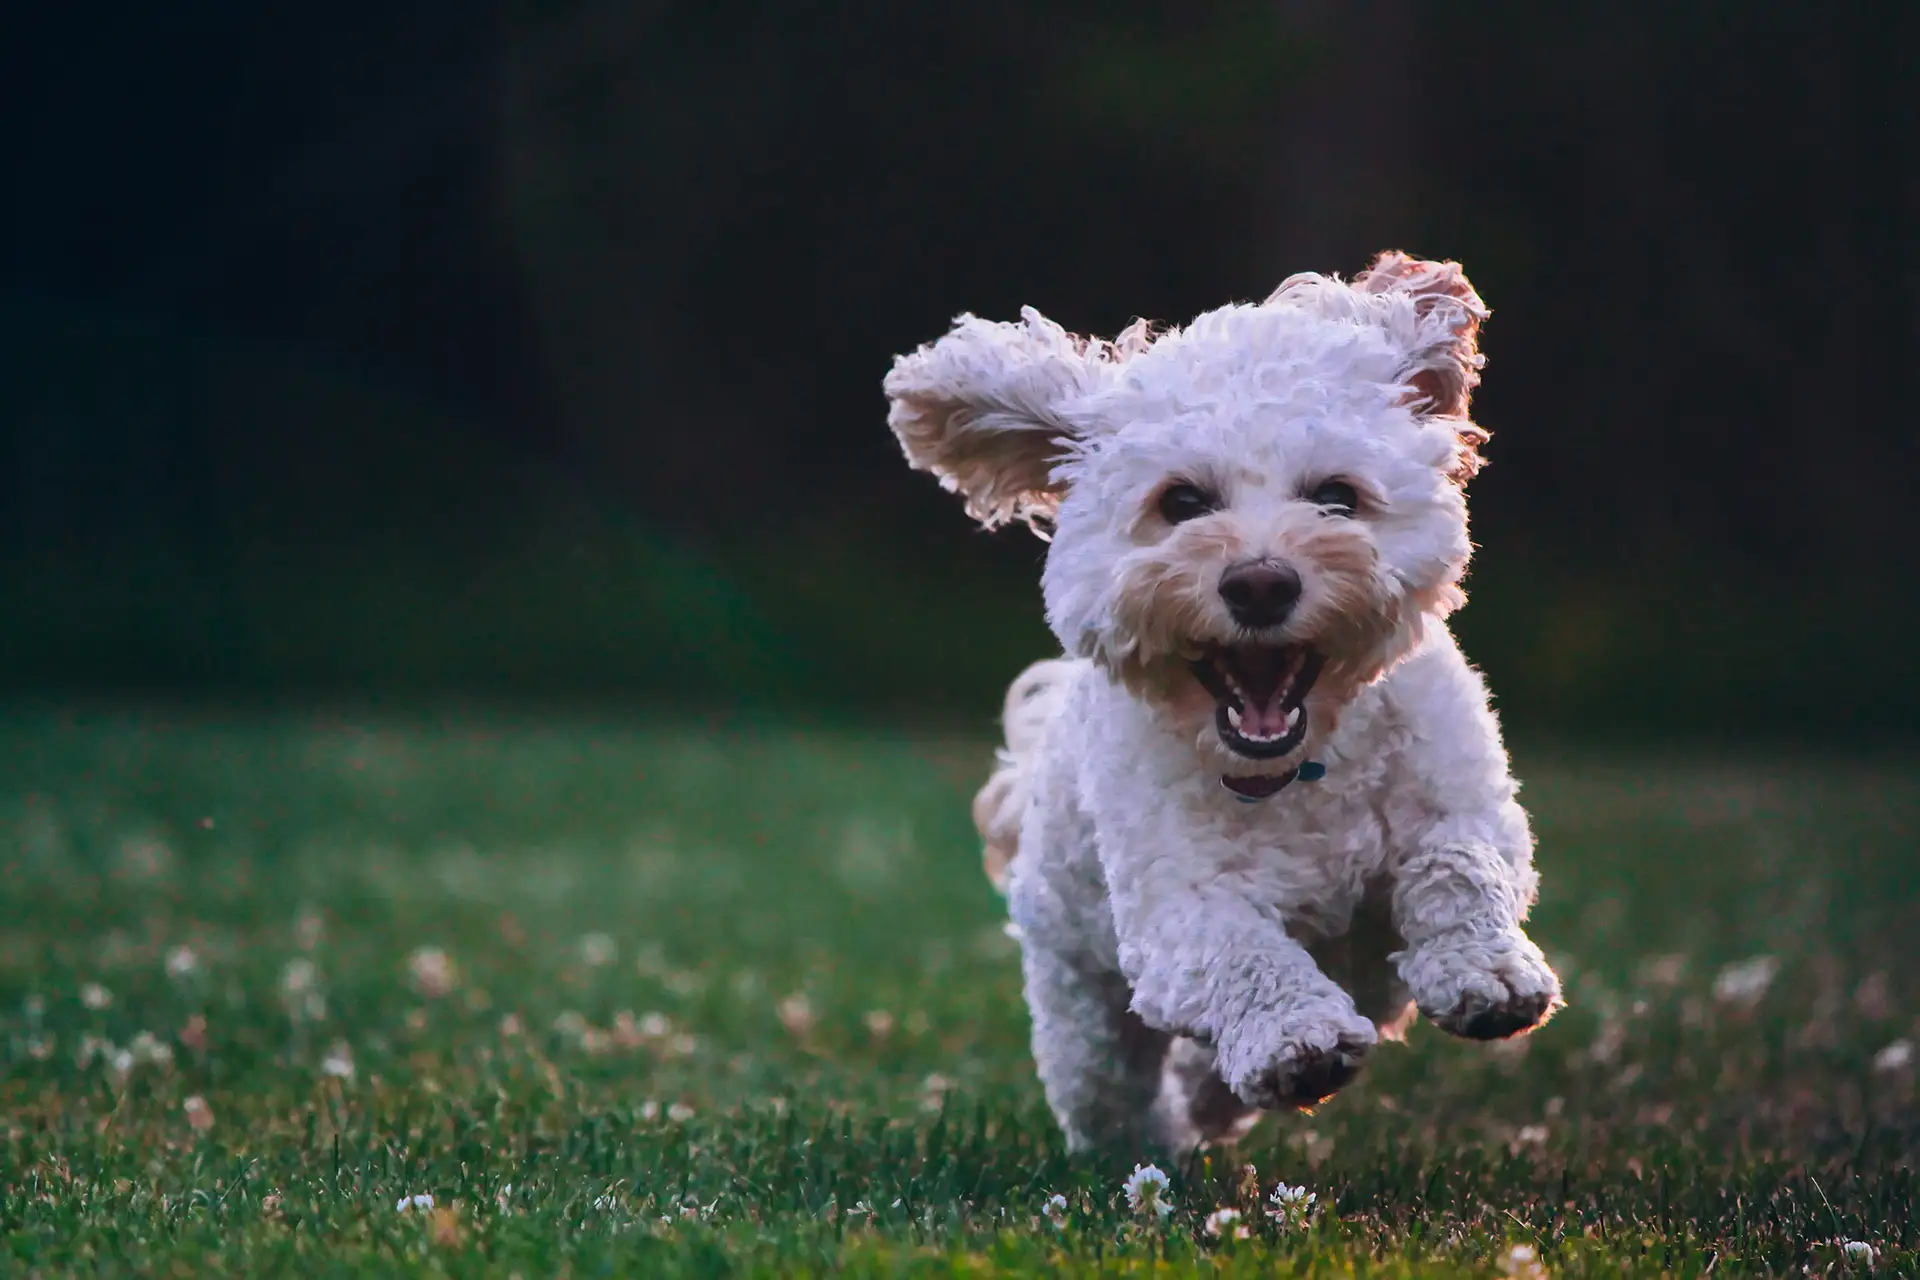 A small white poodle mix running in a grass field